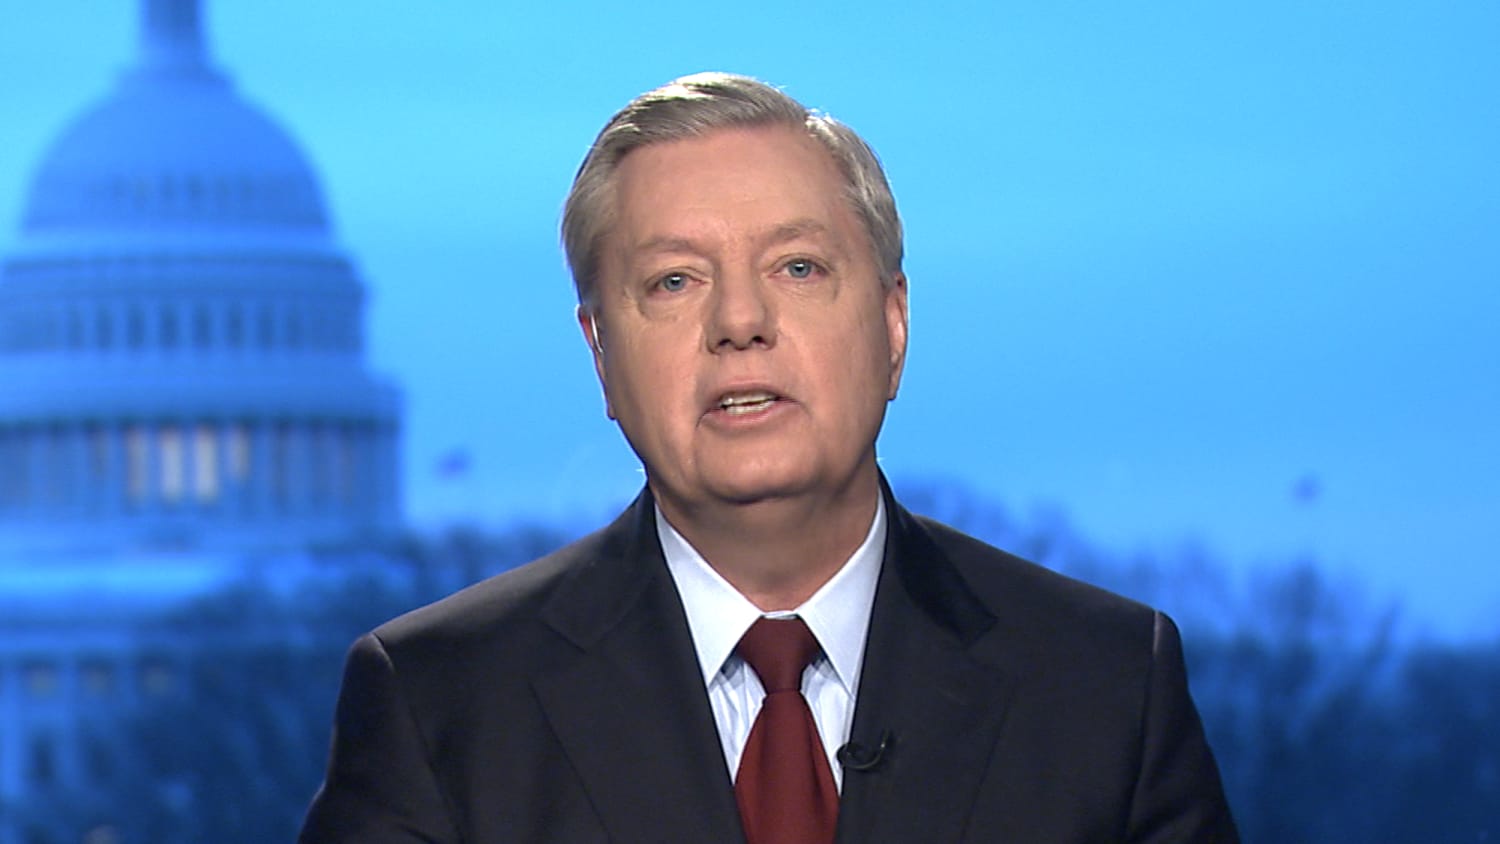 Lindsey Graham on Trump wiretap claims: 'If it's not true, just tell me' - TODAY.com